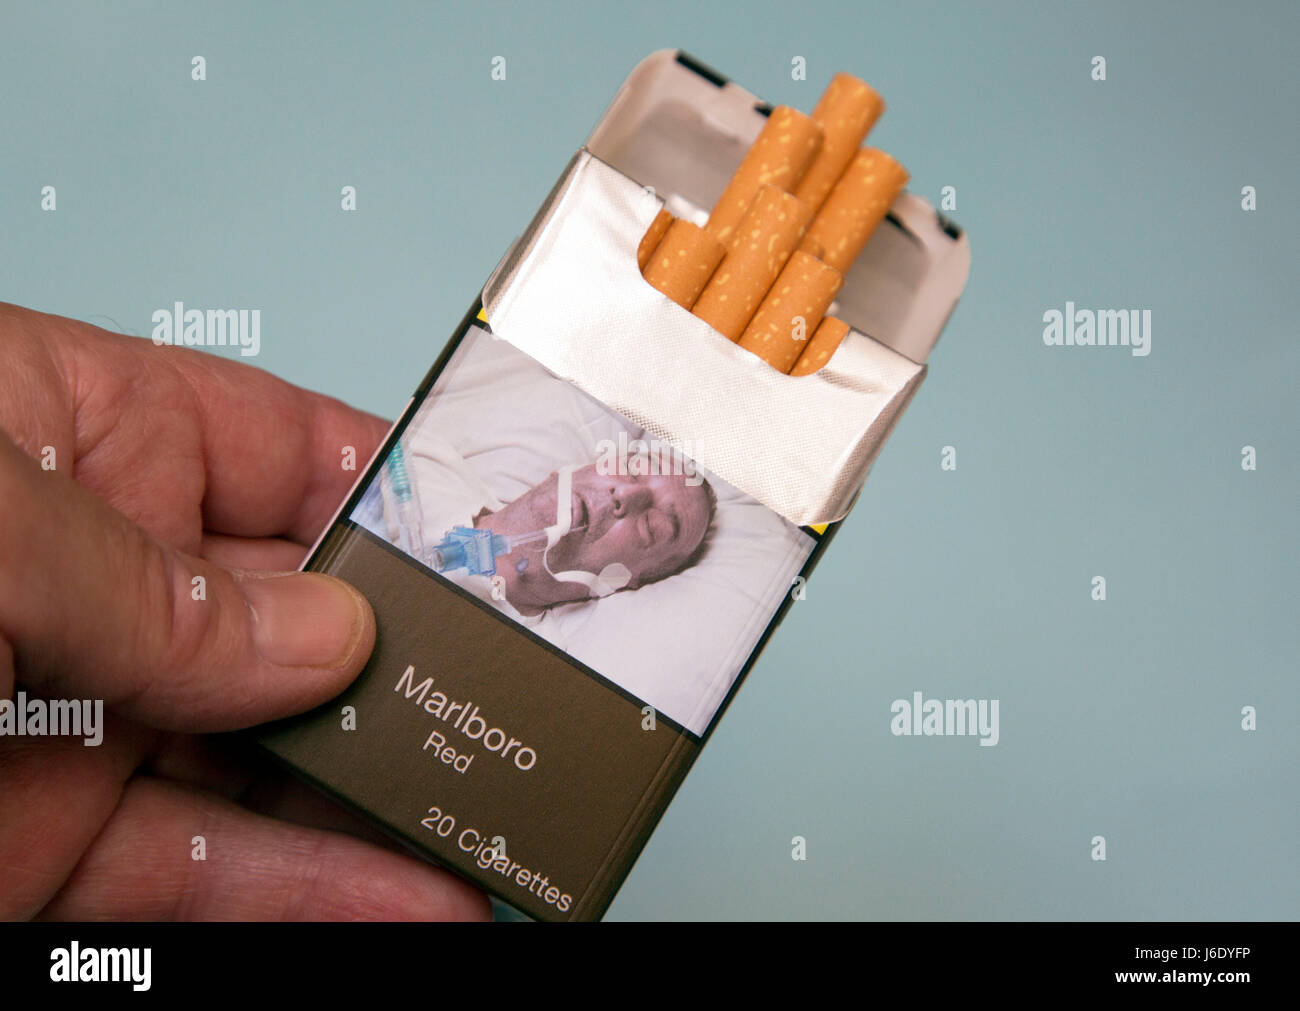 Plain packaged cigarette packet with no logos, London Stock Photo